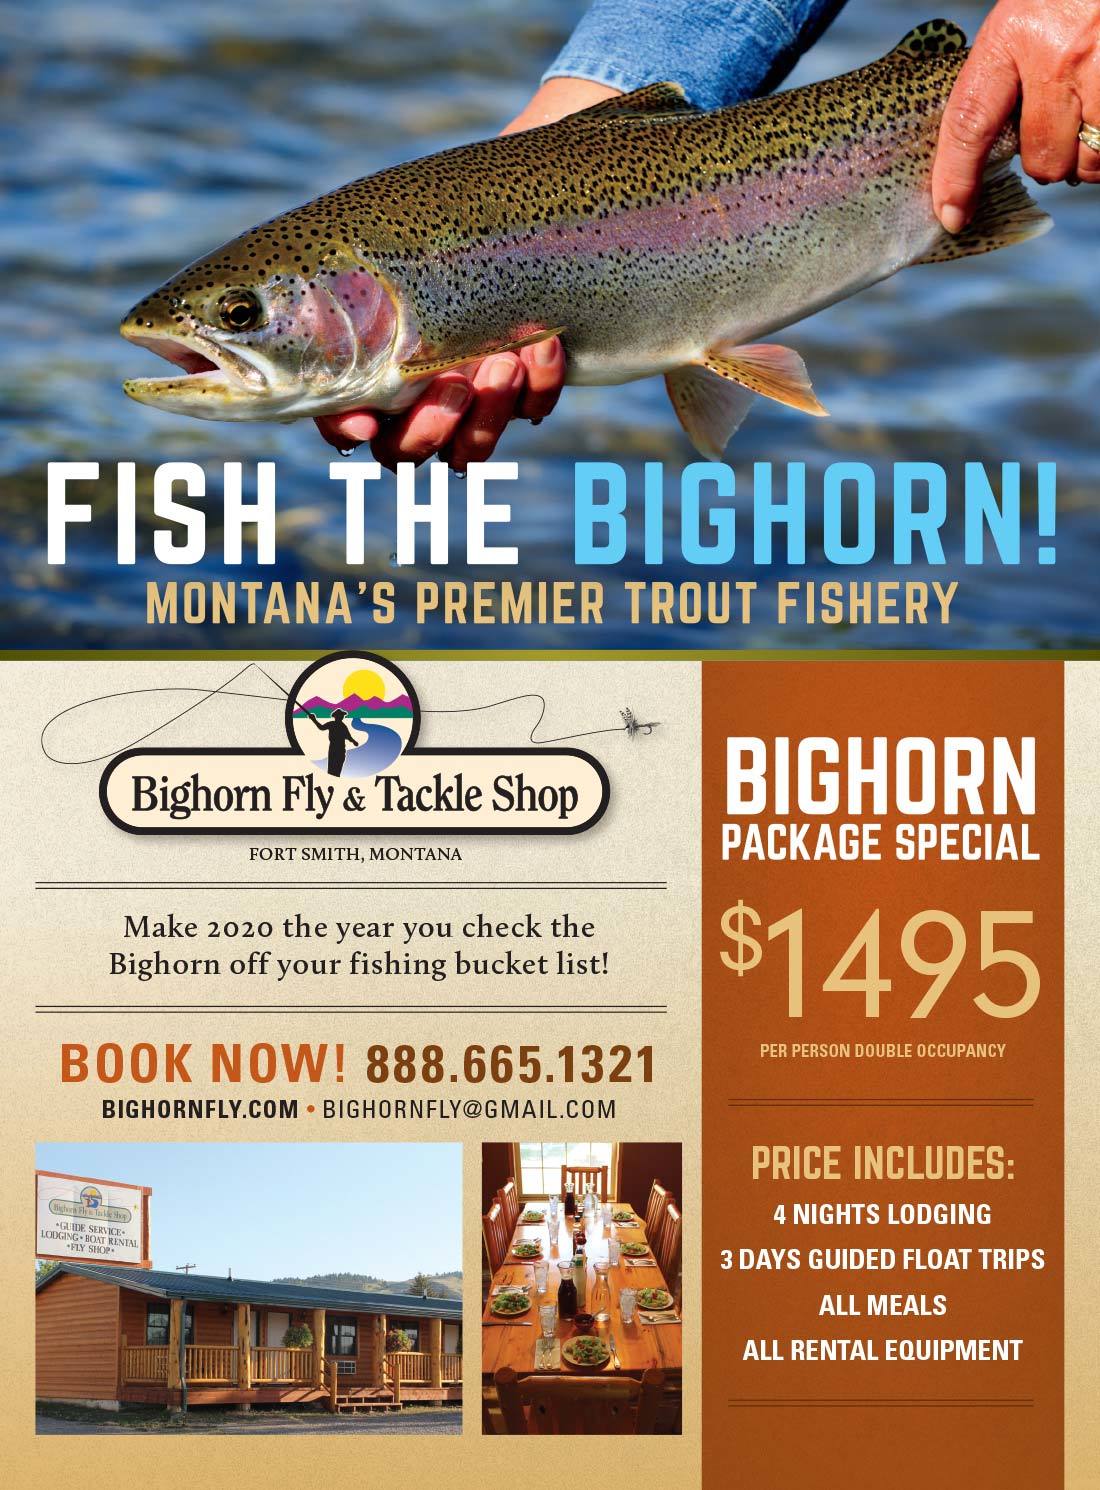 Bighorn Fly & Tackle Fishing Package Special